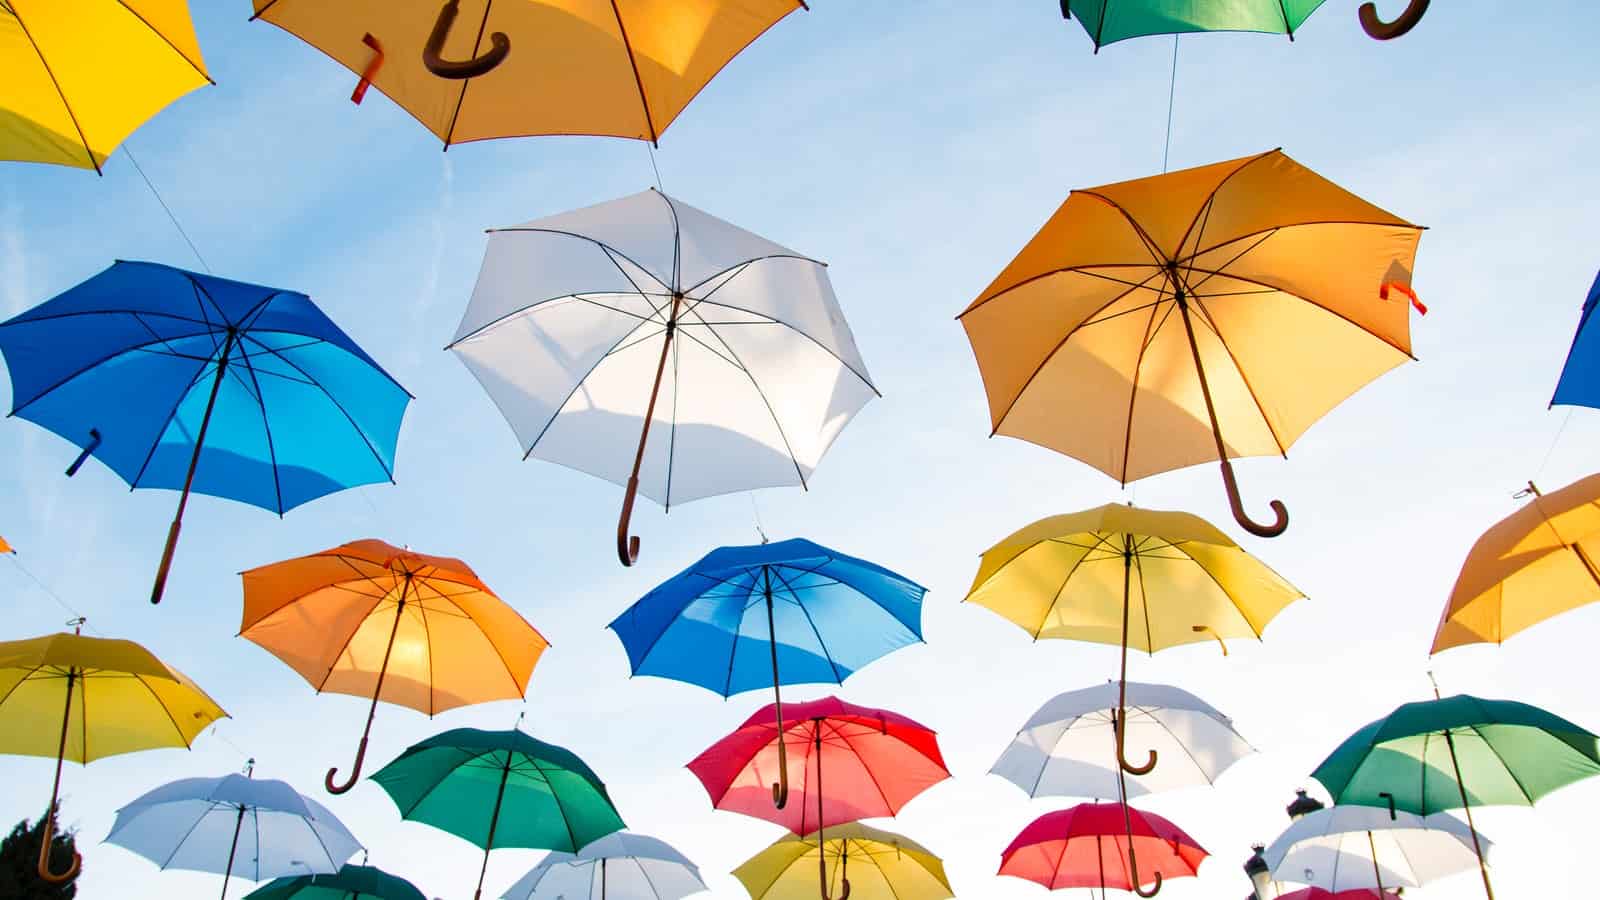 A graphic of umbrellas floating in the sky.